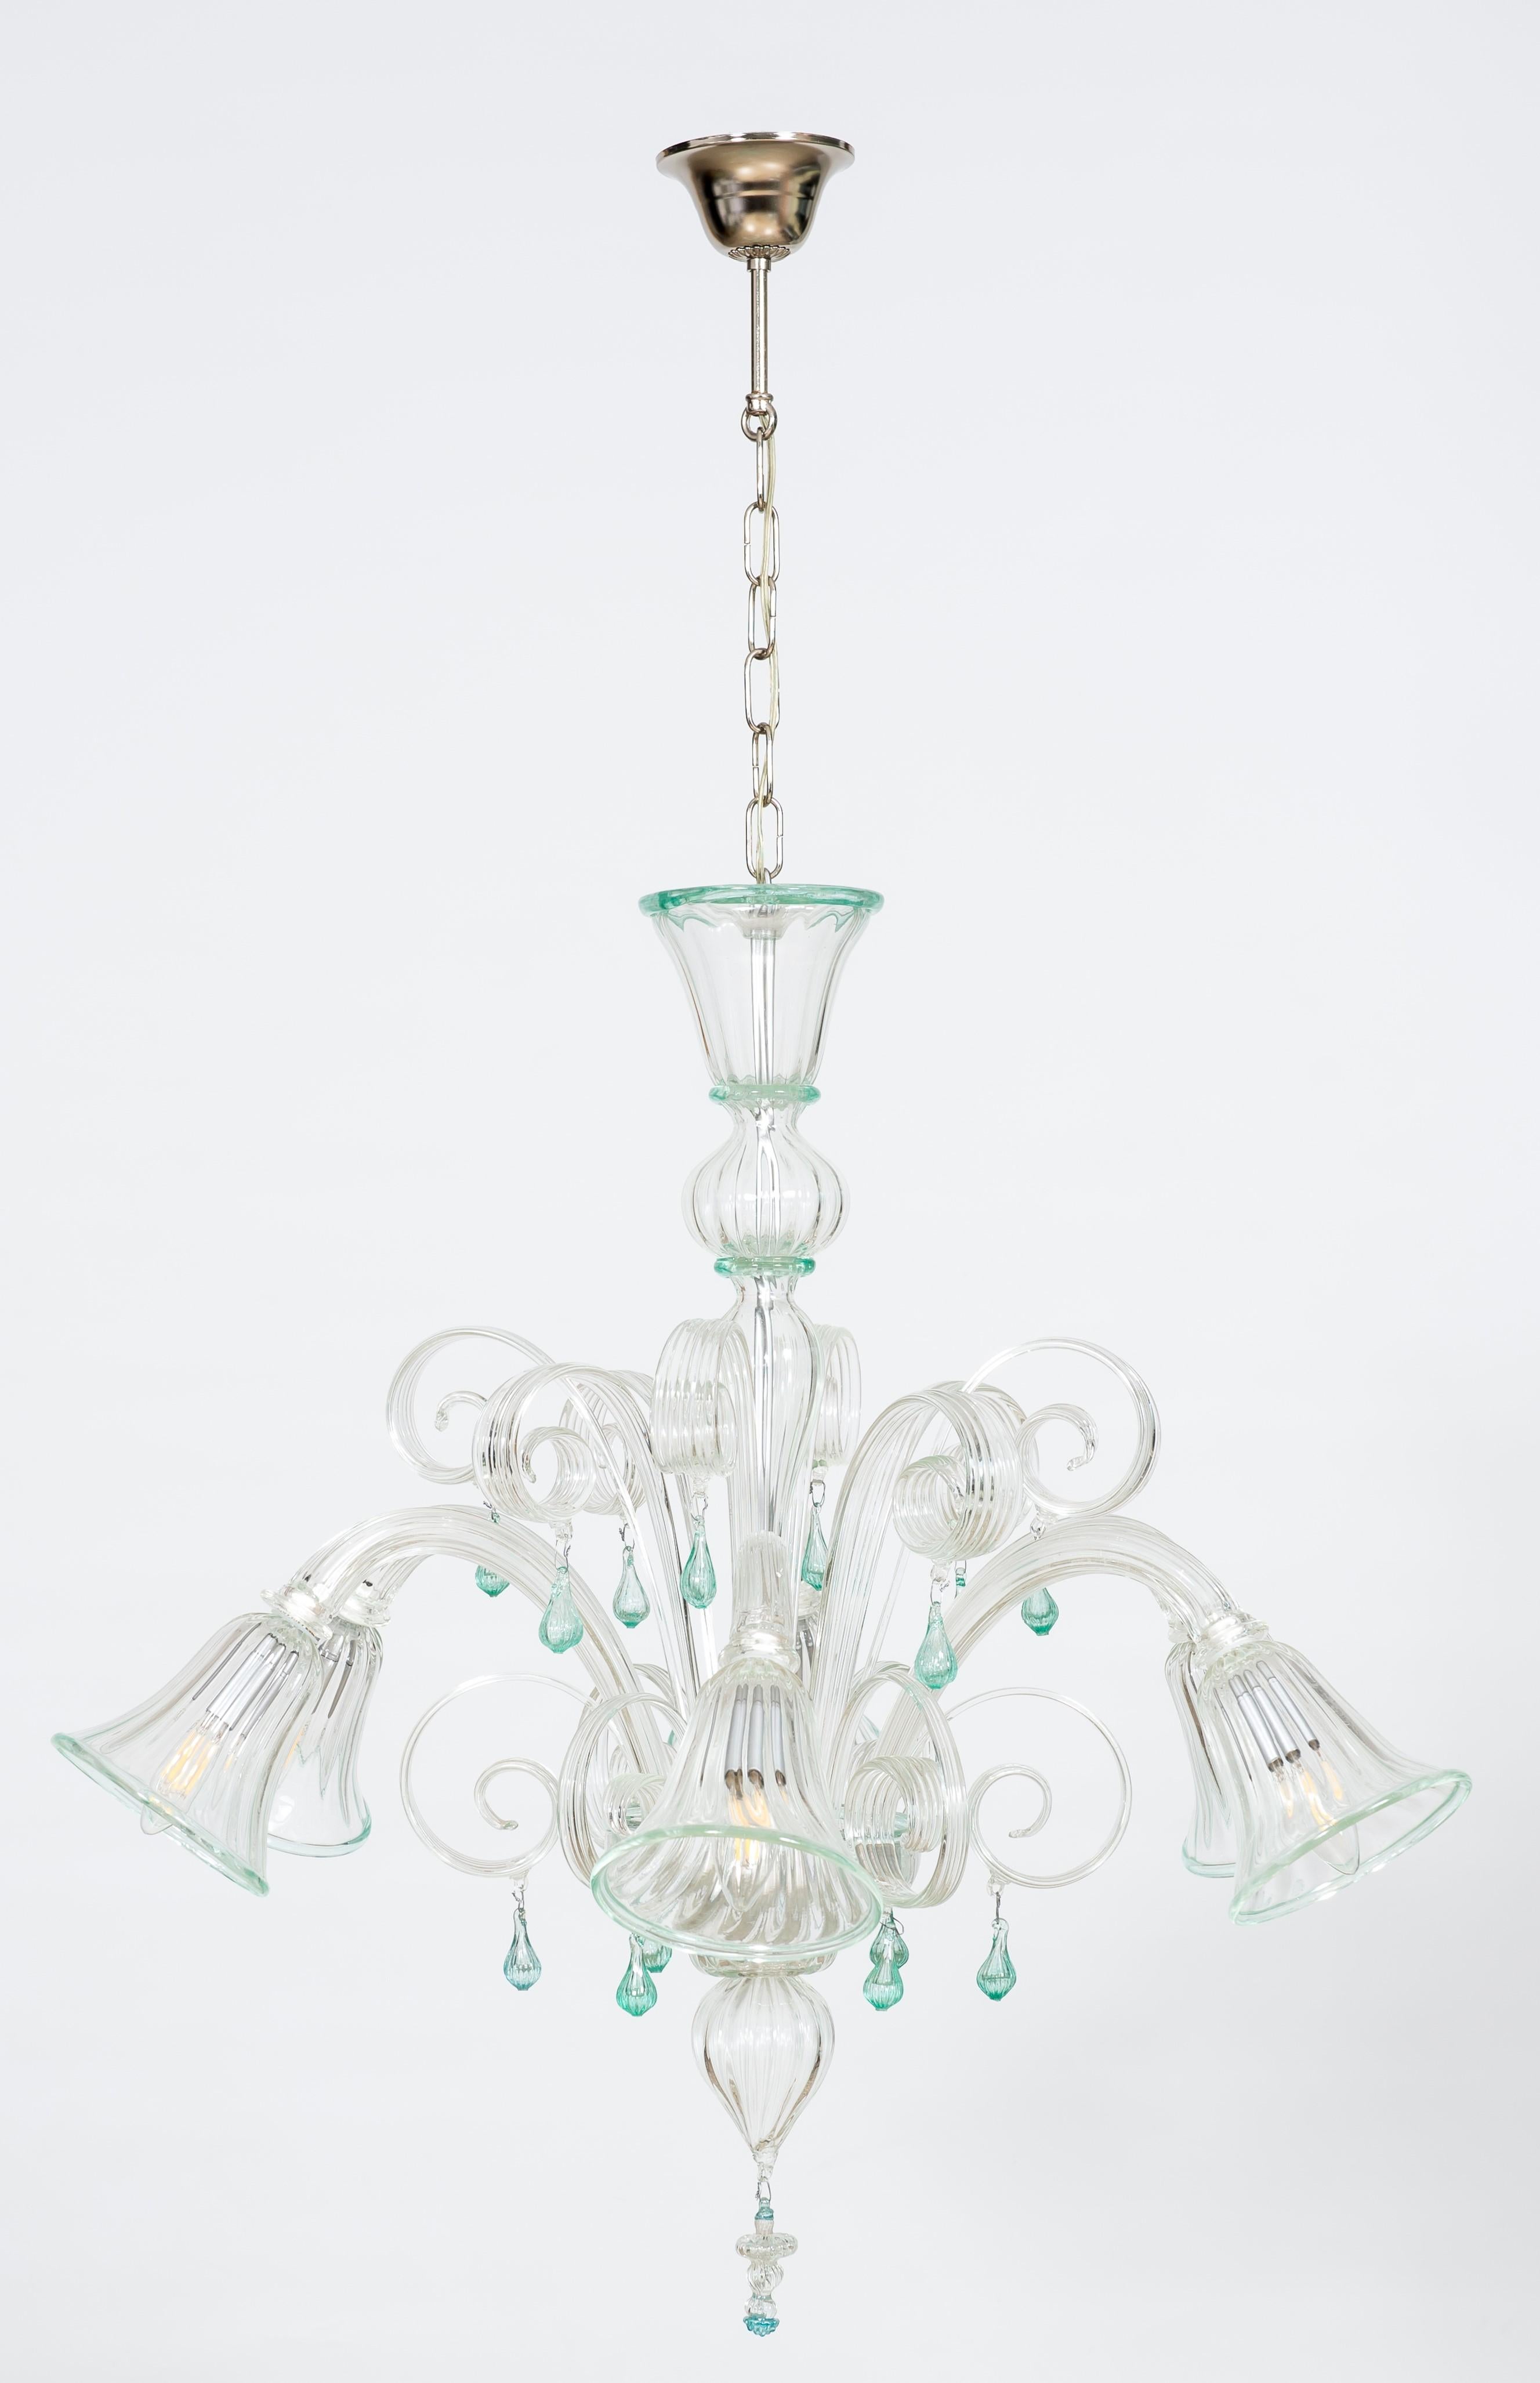 Transparent and Green Bluebell Chandelier in Murano Glass, Italy.
This superb glass art chandelier was entirely made in the Venetian island of Murano with transparent glass and water-green finishing.
6 lights are enclosed by beautiful